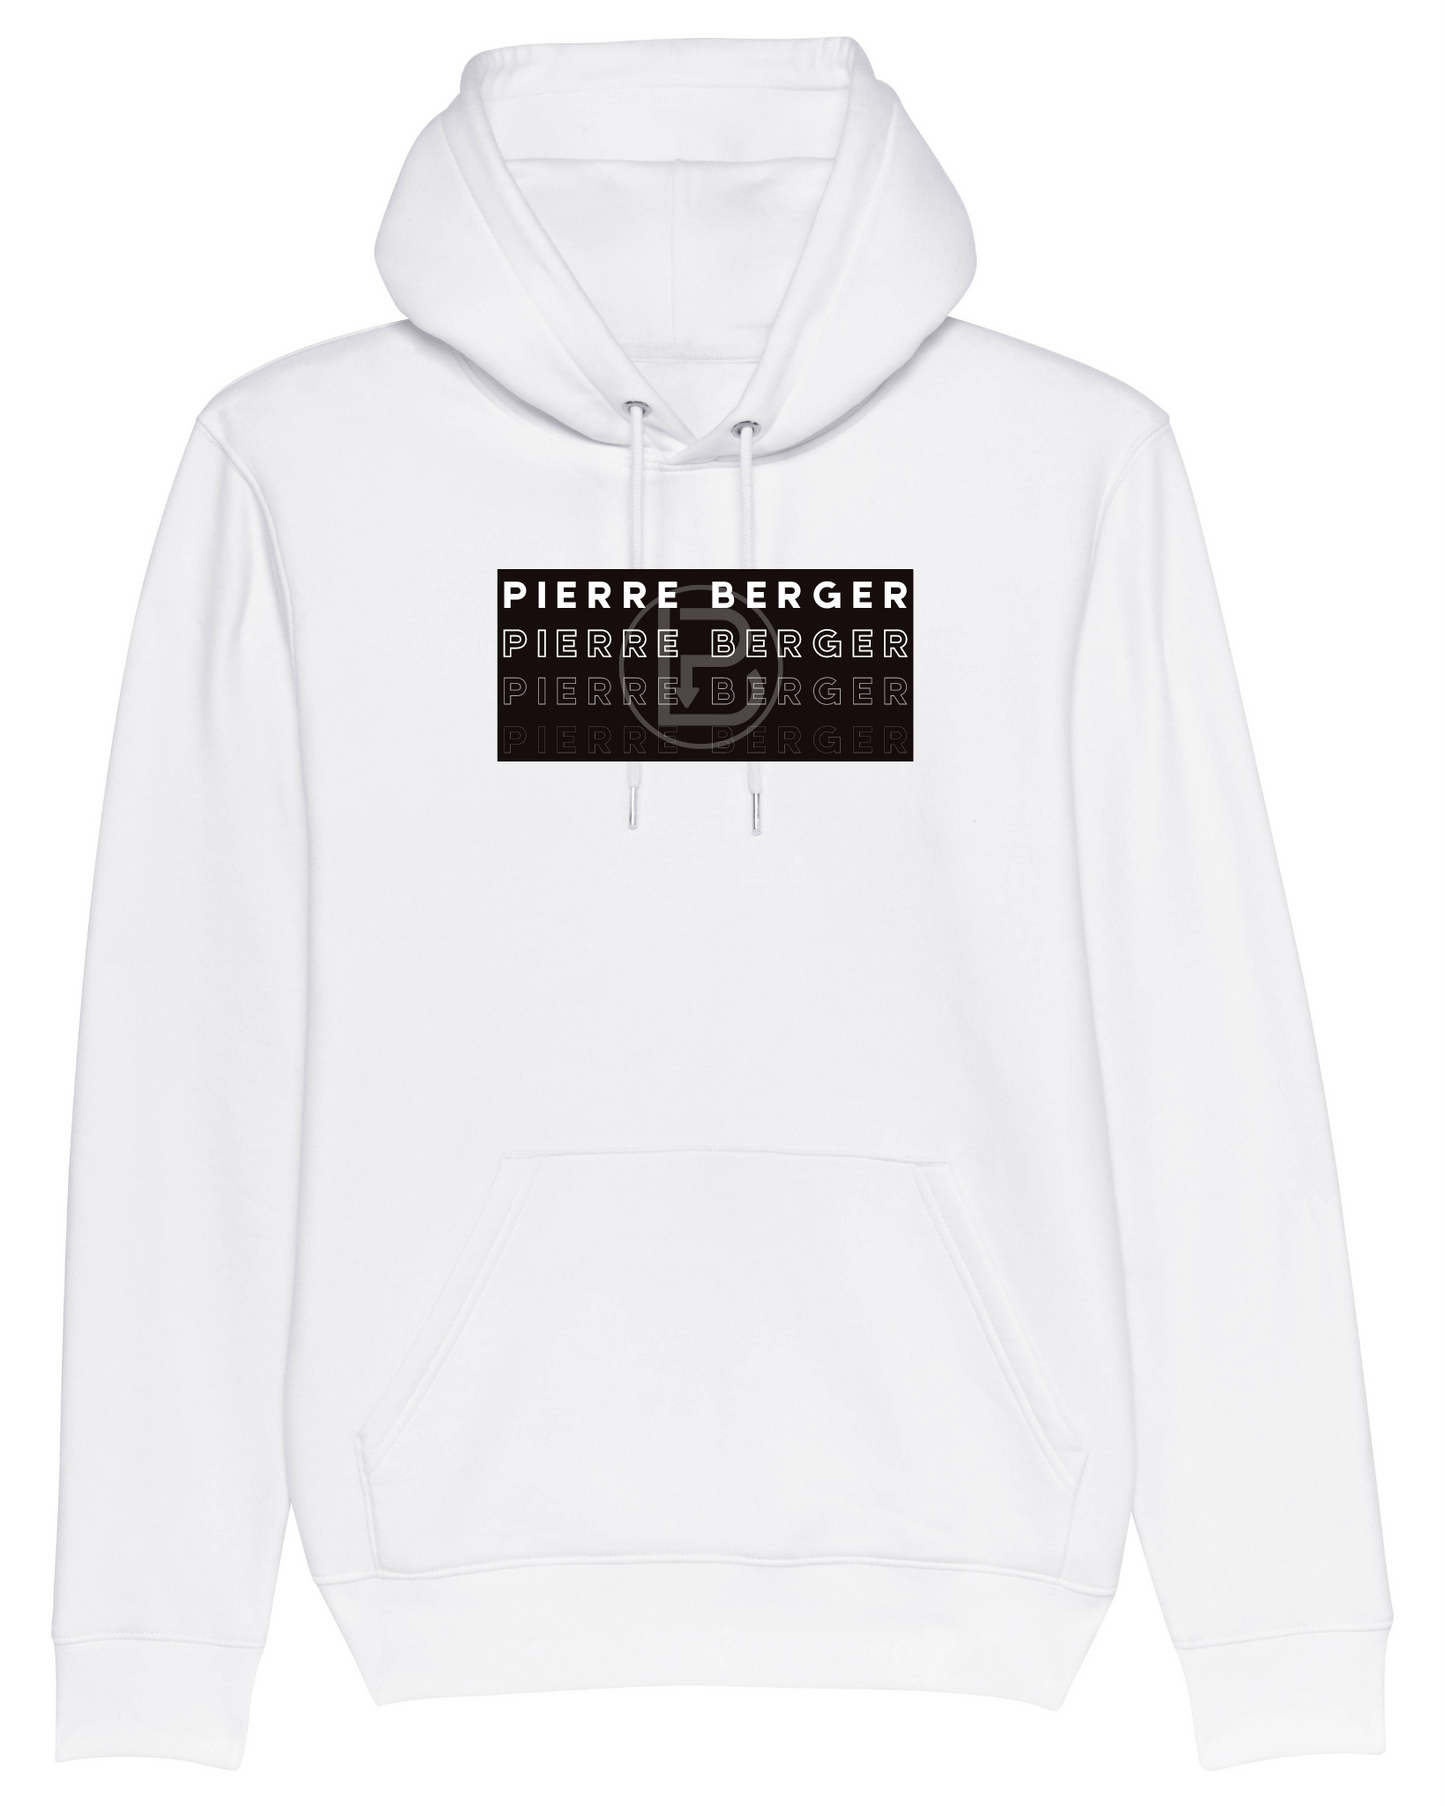 PIERRE BERGER - Unisex Hoodie Black White Simple Typhography 100% recycelt